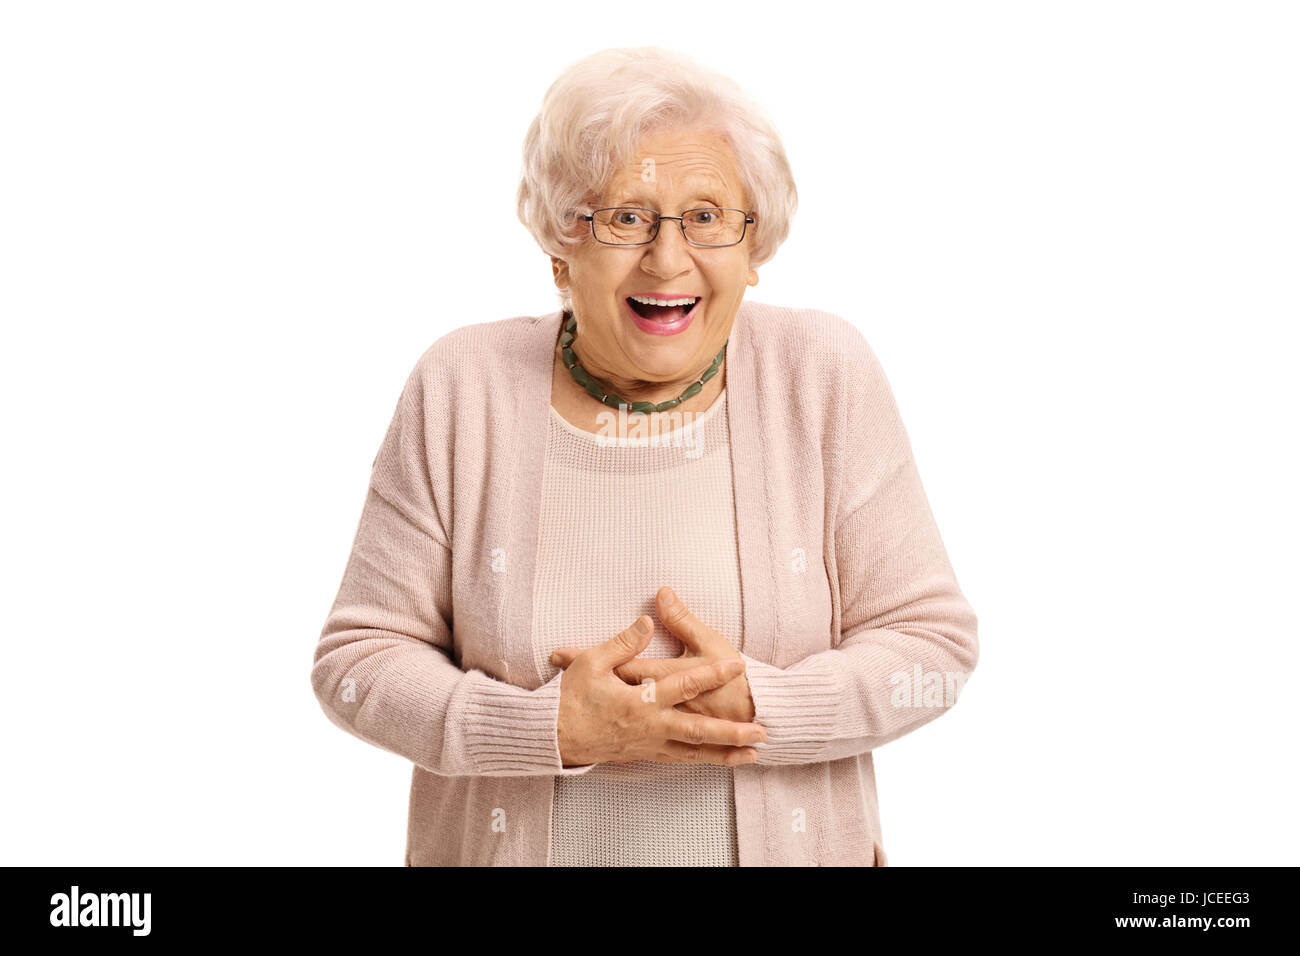 https://c8.alamy.com/comp/JCEEG3/surprised-elderly-woman-looking-at-the-camera-and-laughing-isolated-JCEEG3.jpg